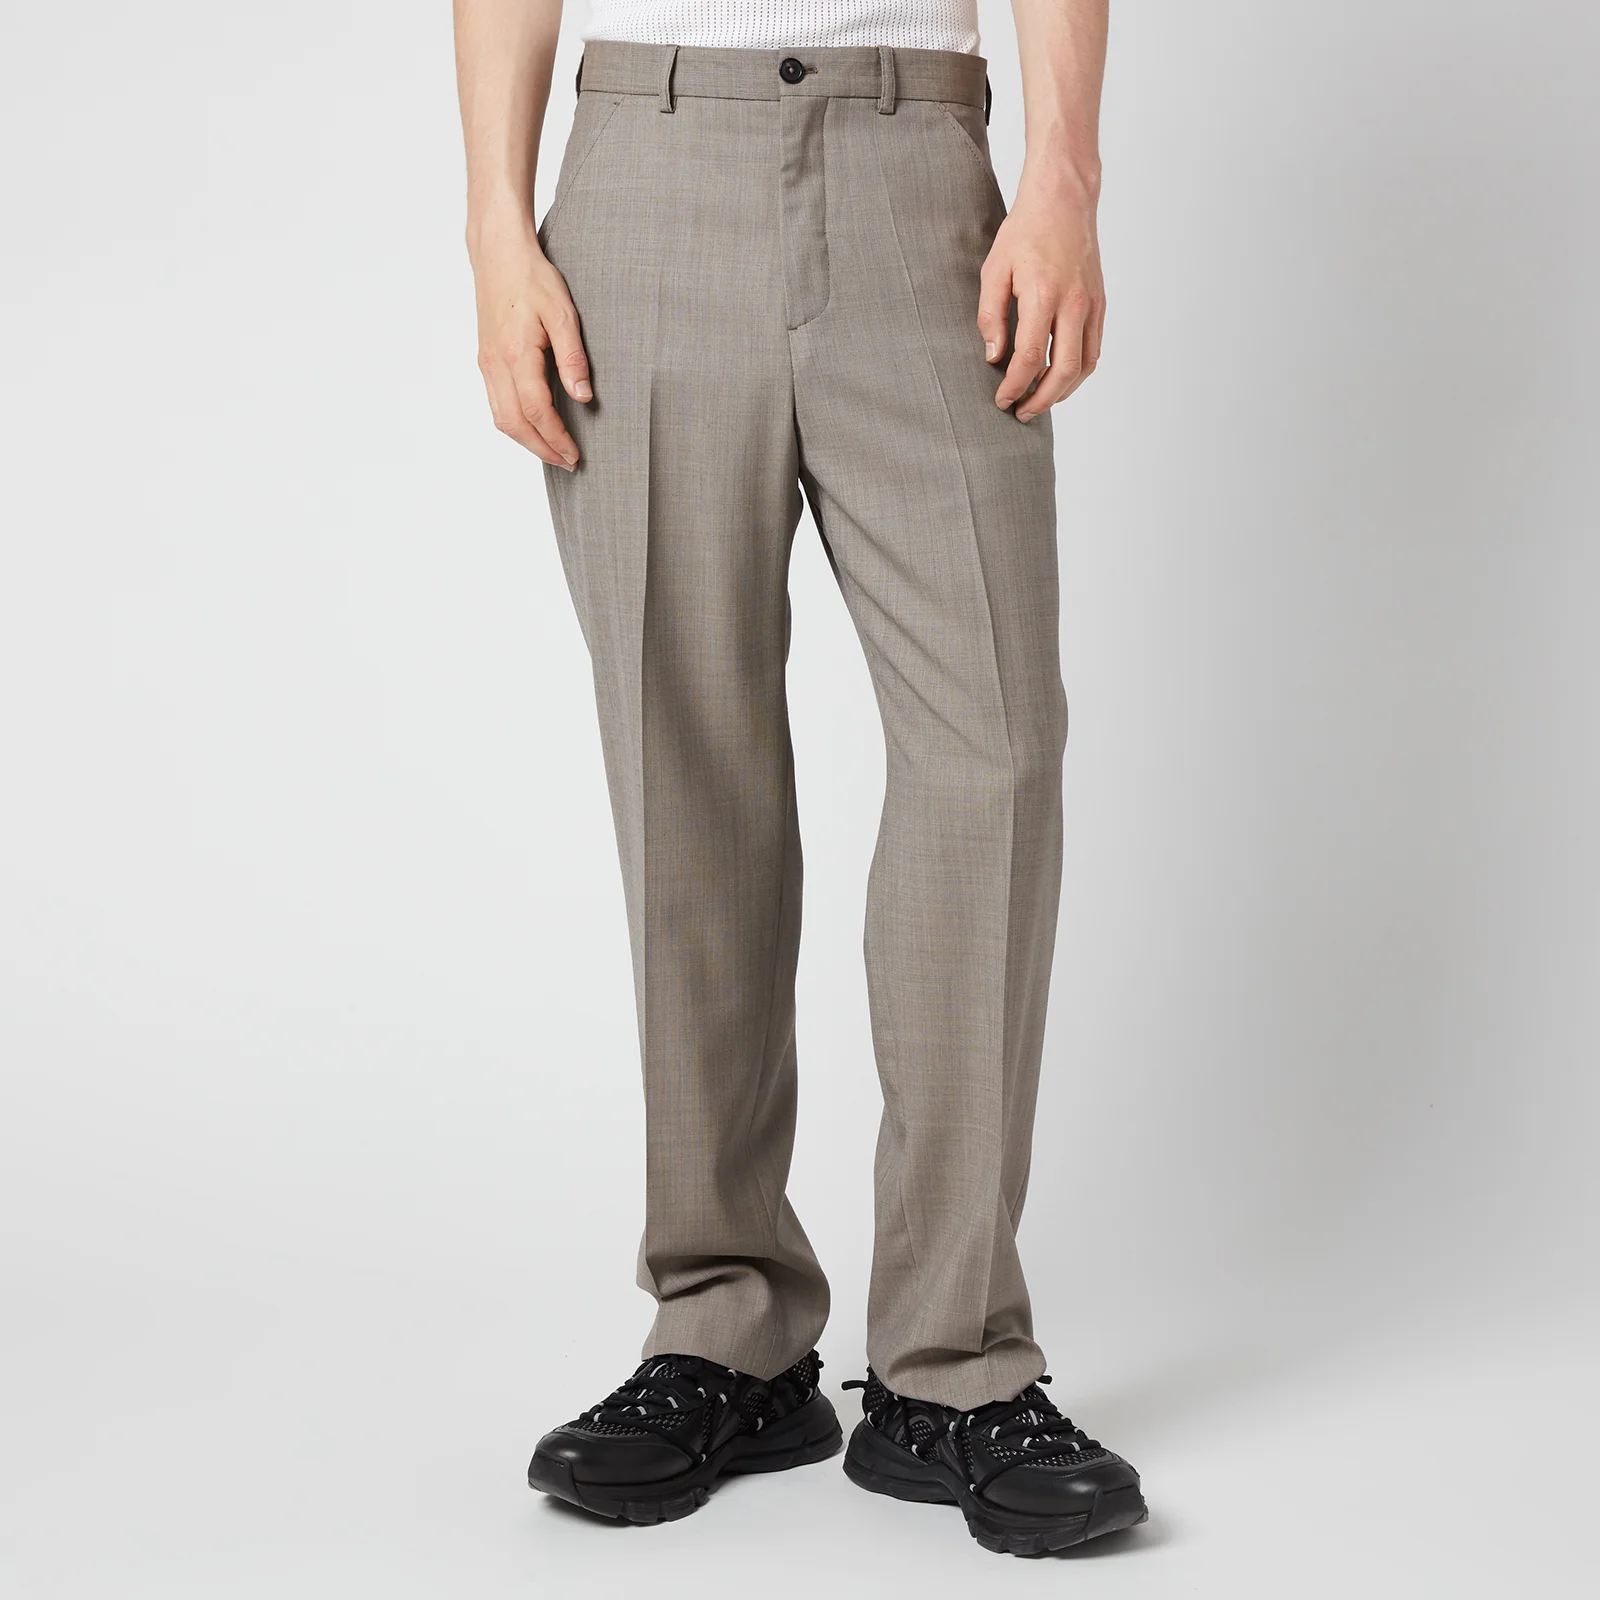 Our Legacy Men's Chinos - Stone Grey Wool Image 1